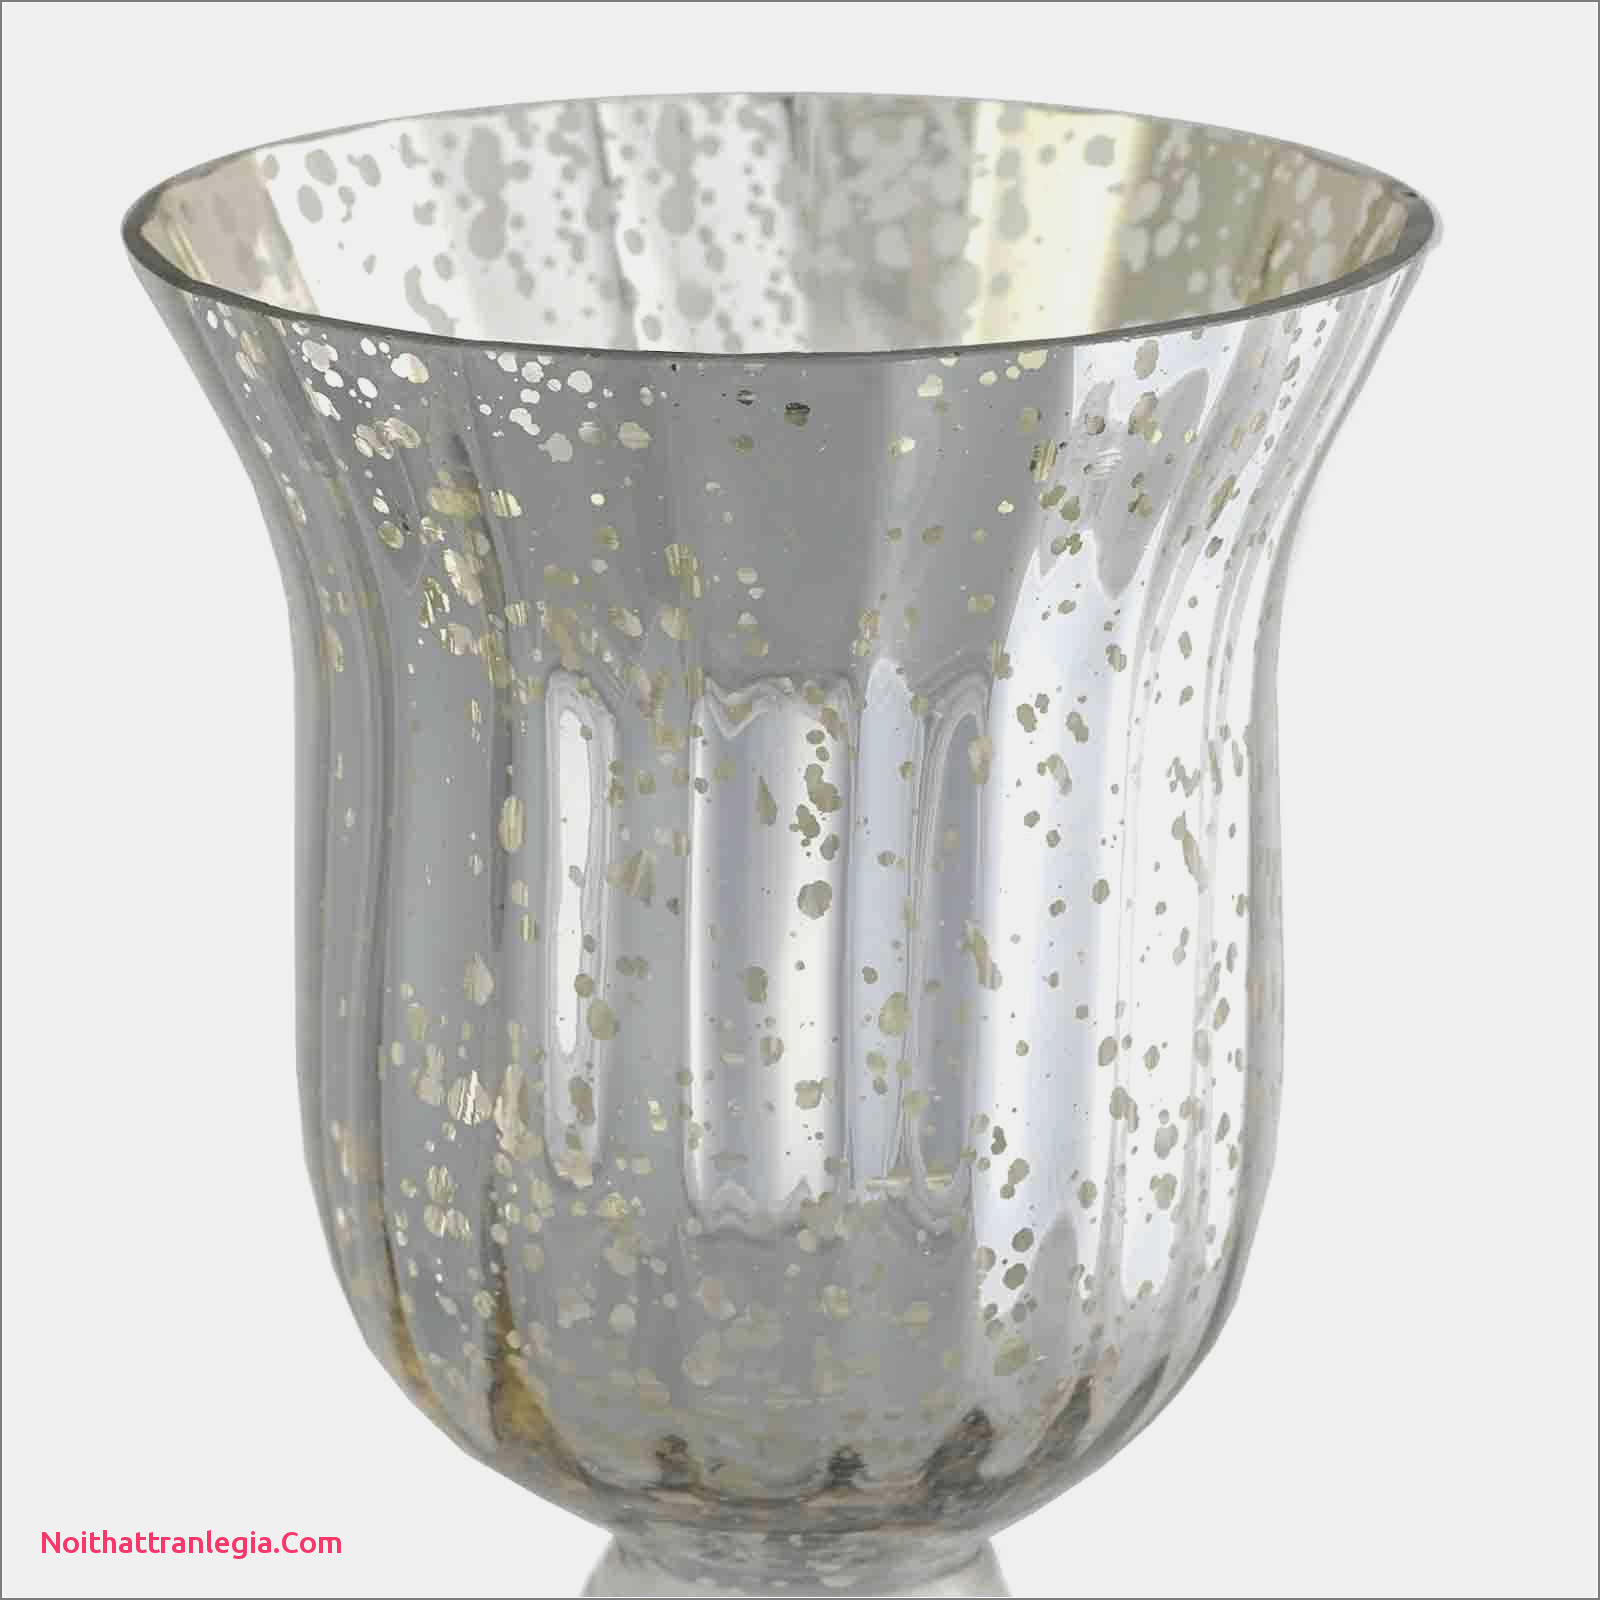 14 Ideal Mini Clear Glass Bud Vases 2024 free download mini clear glass bud vases of 20 wedding vases noithattranlegia vases design within wedding guest gift ideas inspirational candles for wedding favors superb pe s5h vases candle vase i